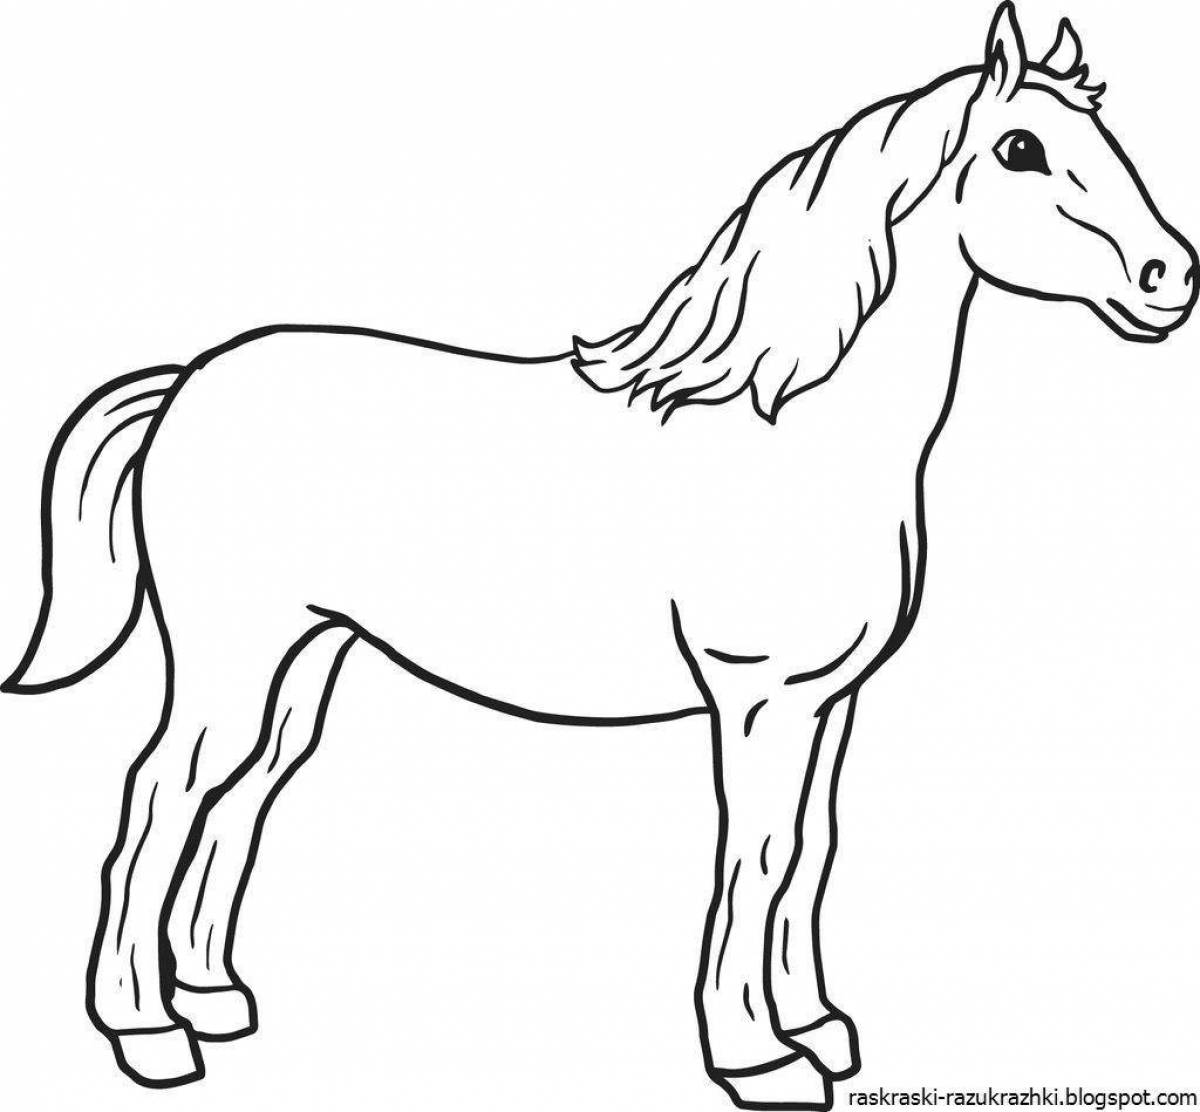 Coloring big horse for children 3-4 years old